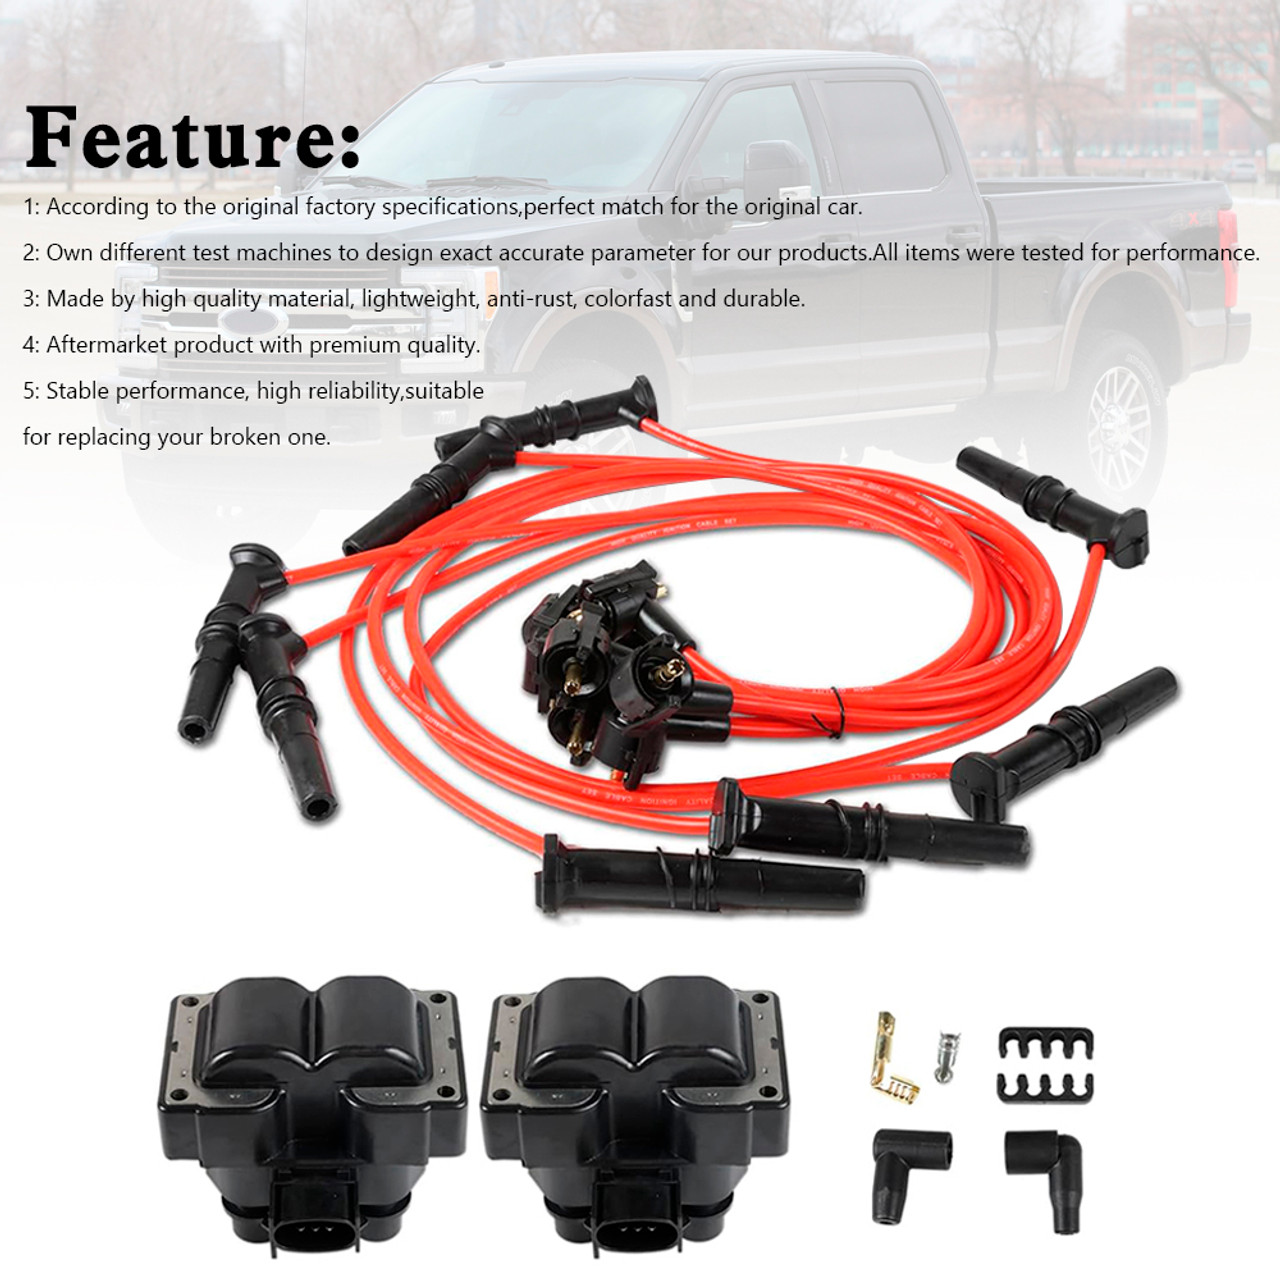 2 Ignition Coil Pack & 8 Spark Plug Wire FD487 For Ford F150 F250 Lincoln Mercury